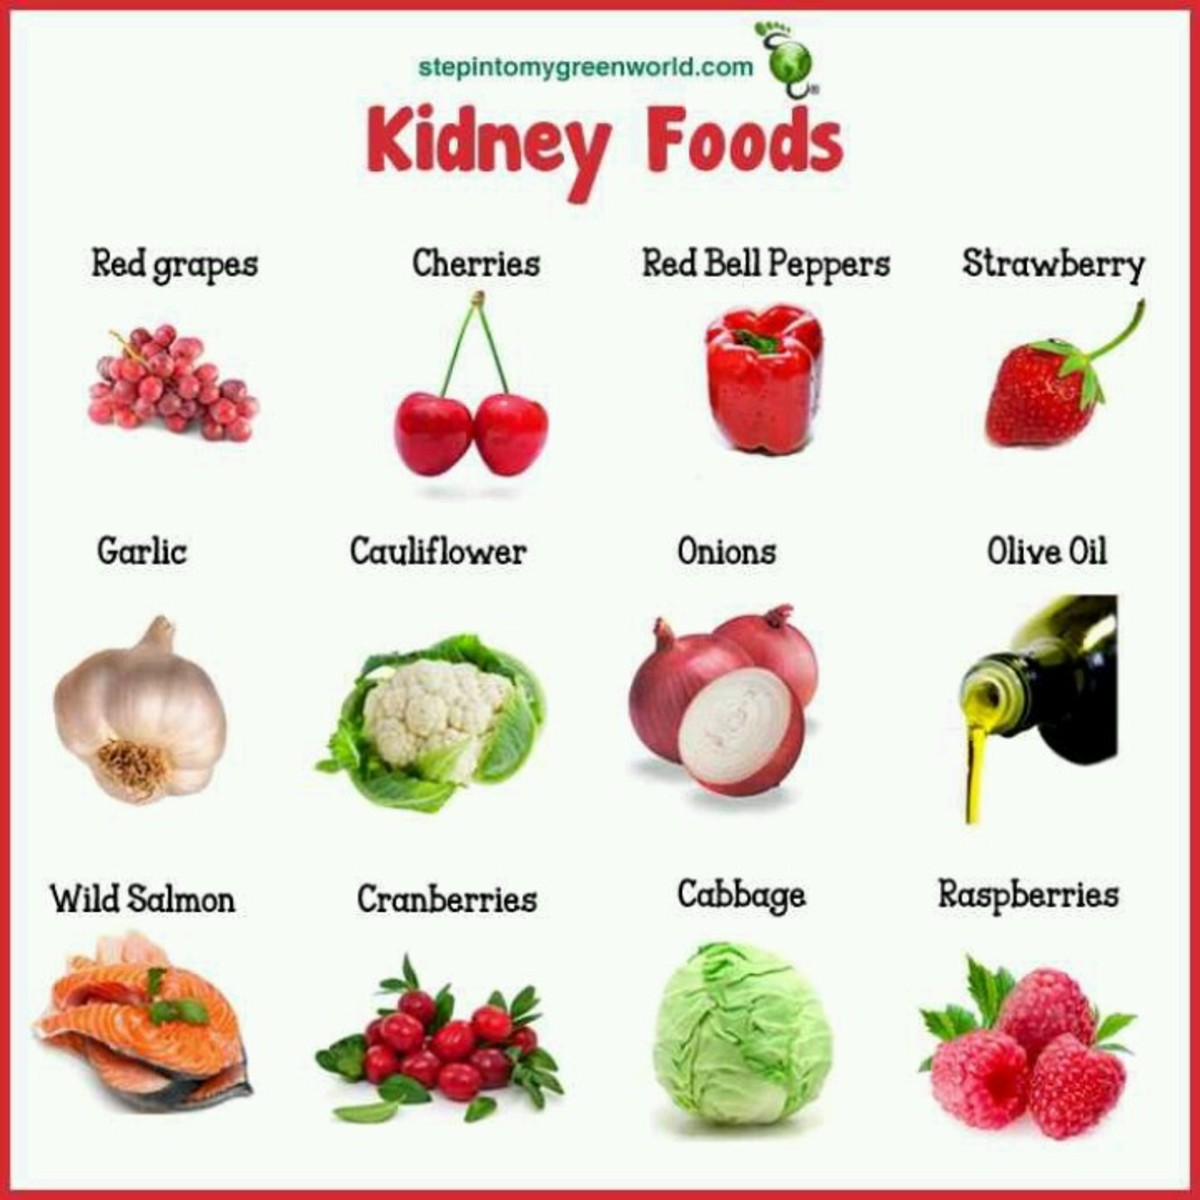 17 Signs Of Chronic Kidney Disease | HubPages